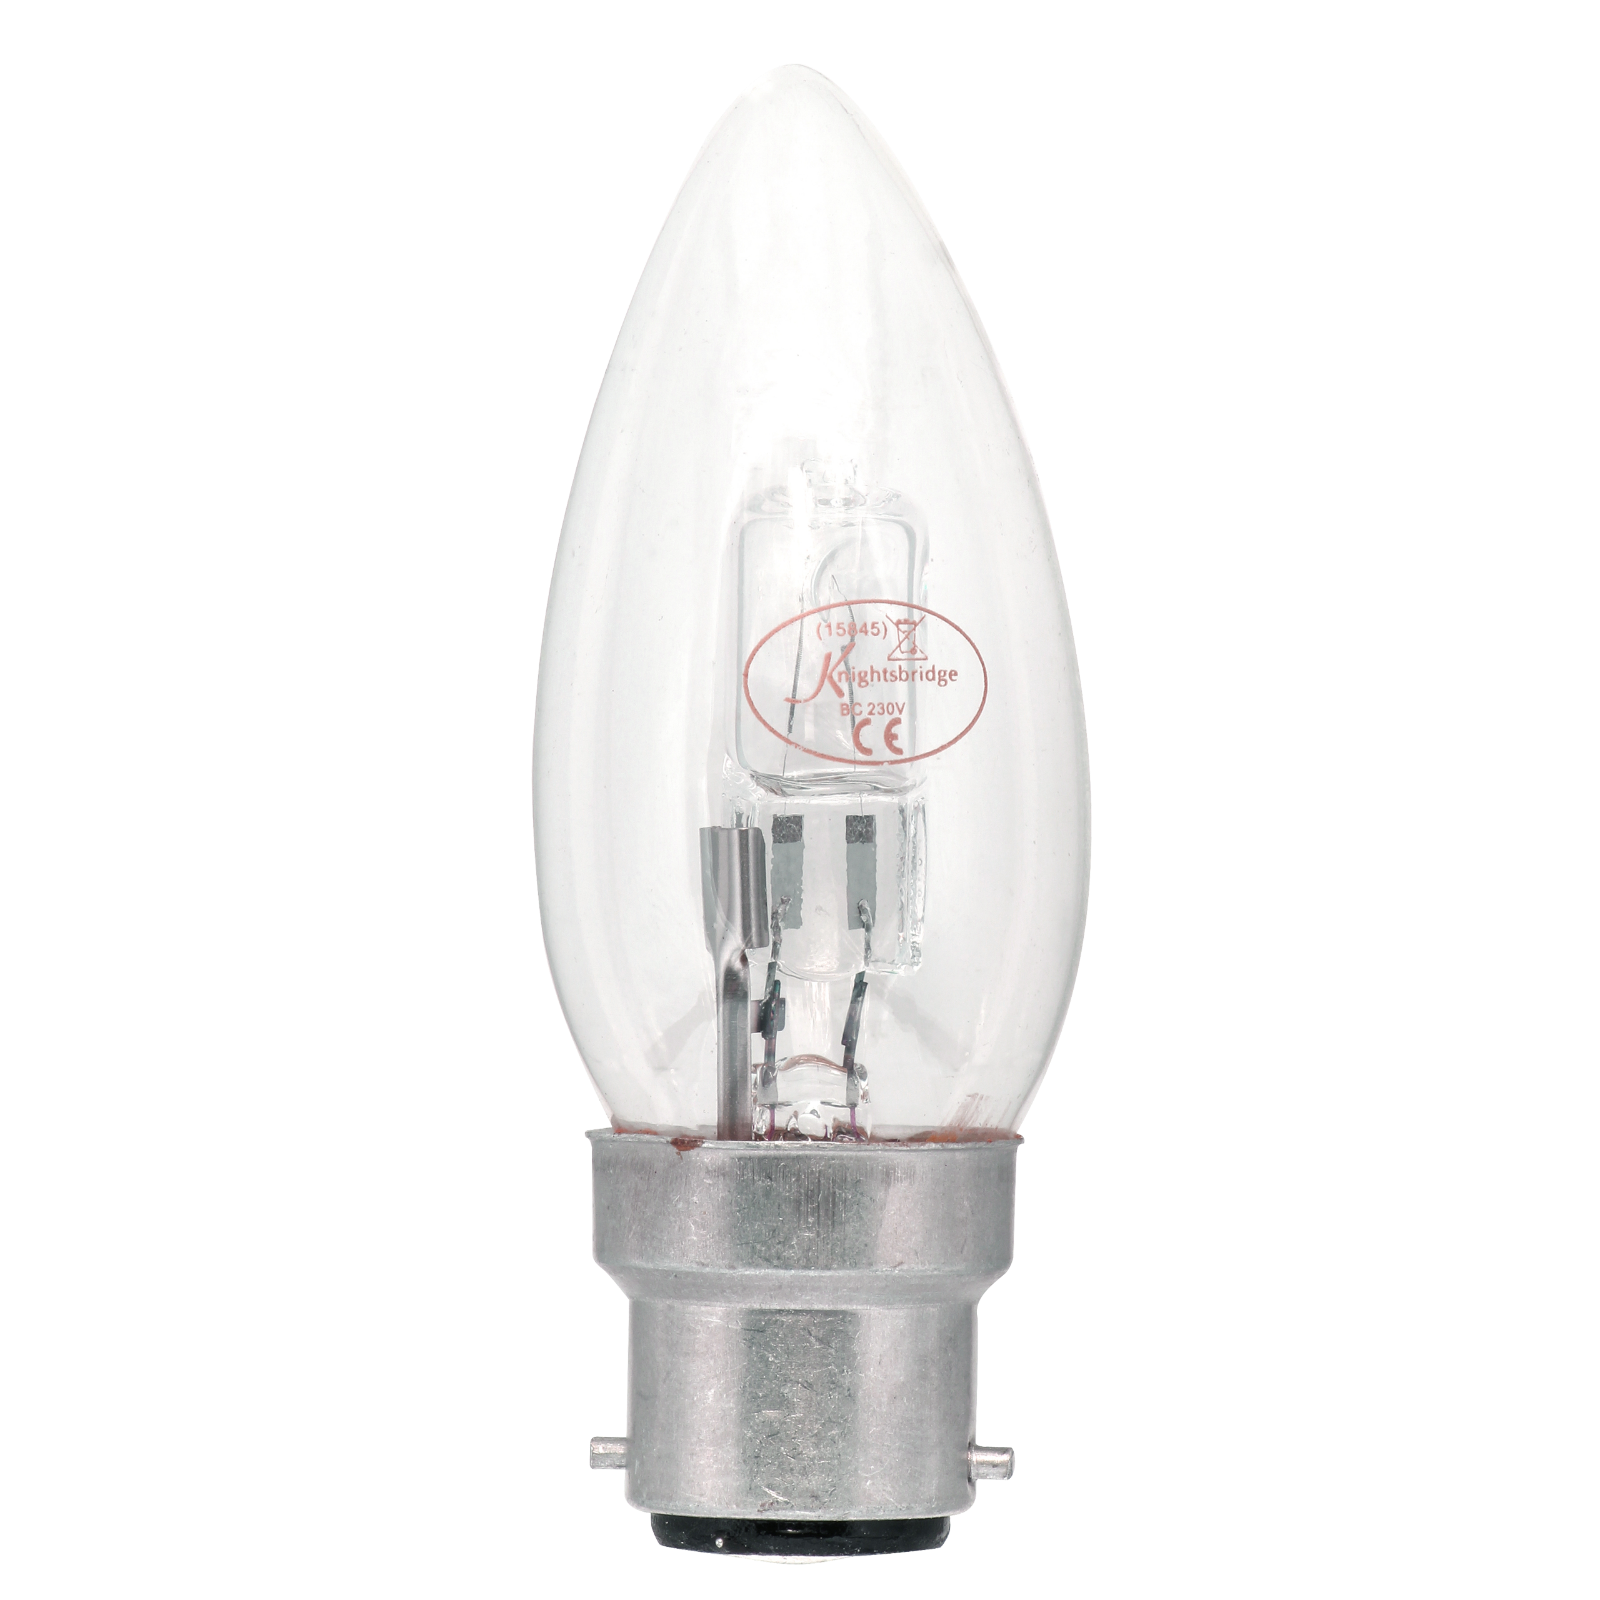 28W Halogen Energy Saving Clear Candle Lamp BC (equivalent To 40W) - HALO-C28BC 